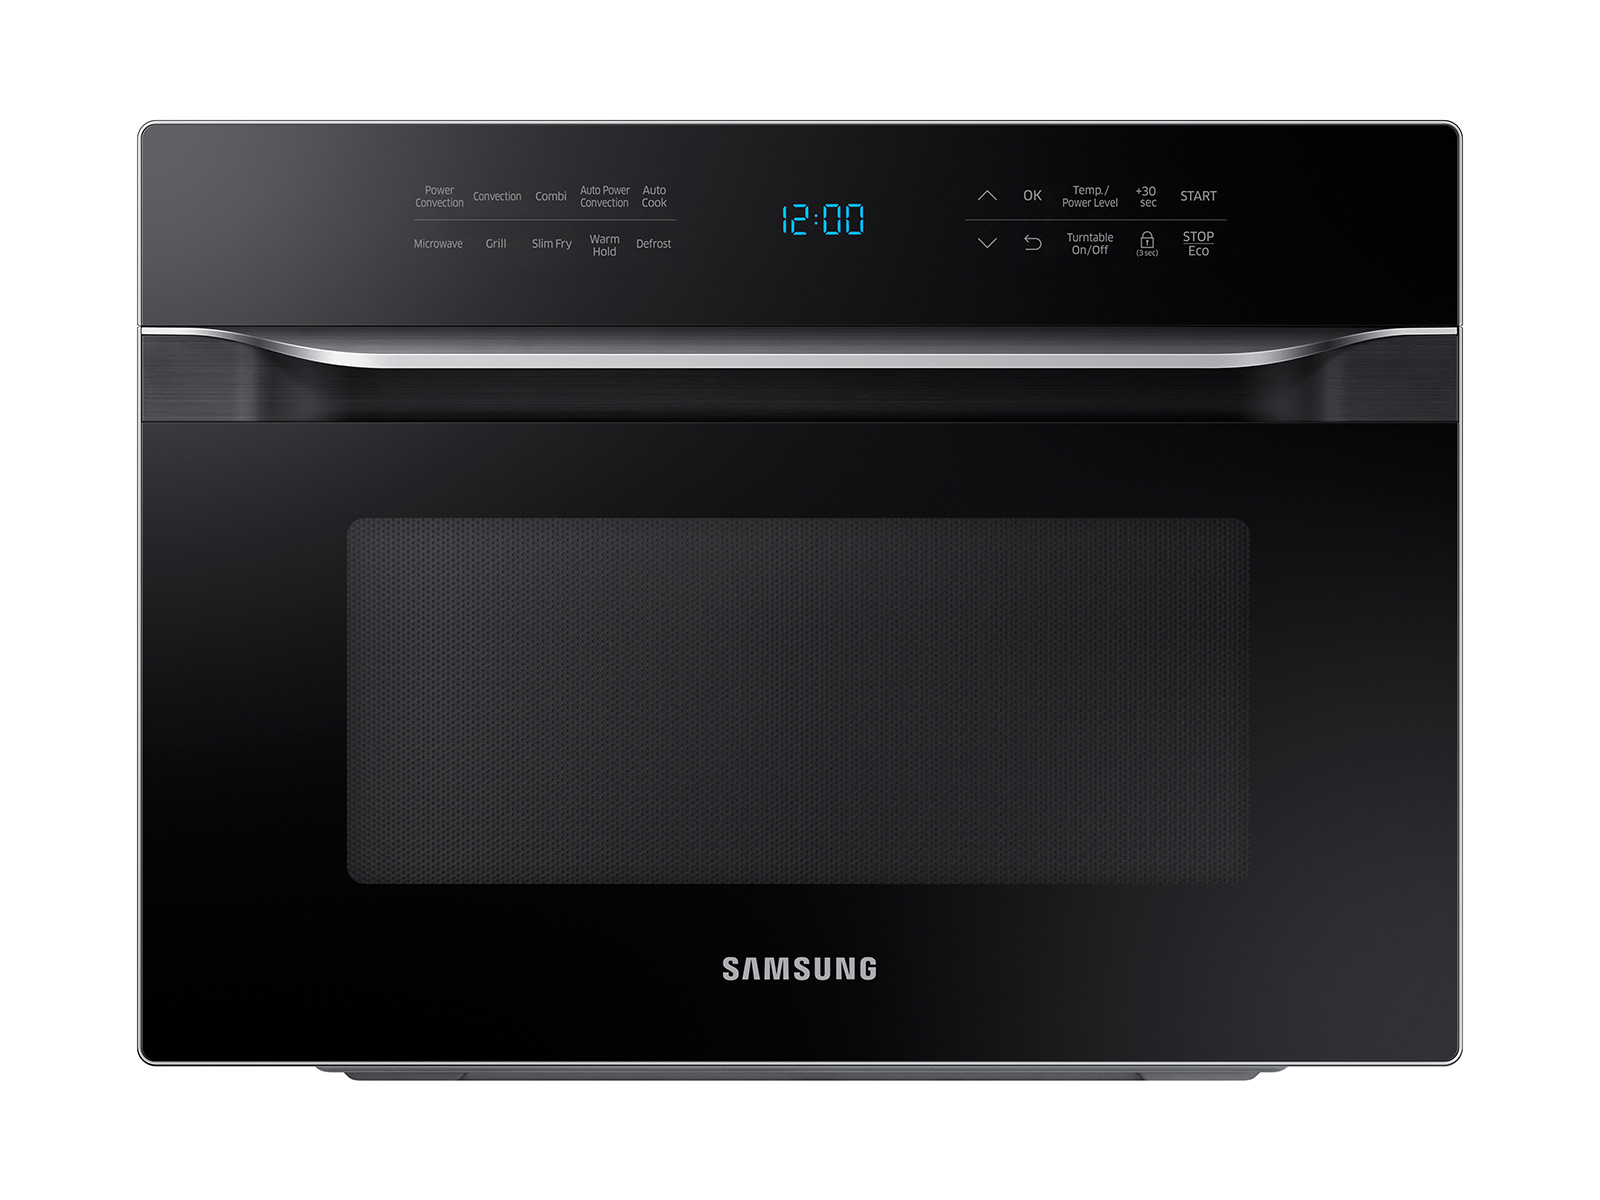 MC12J8035CT Samsung 21 Counter Top Convection Microwave with Eco